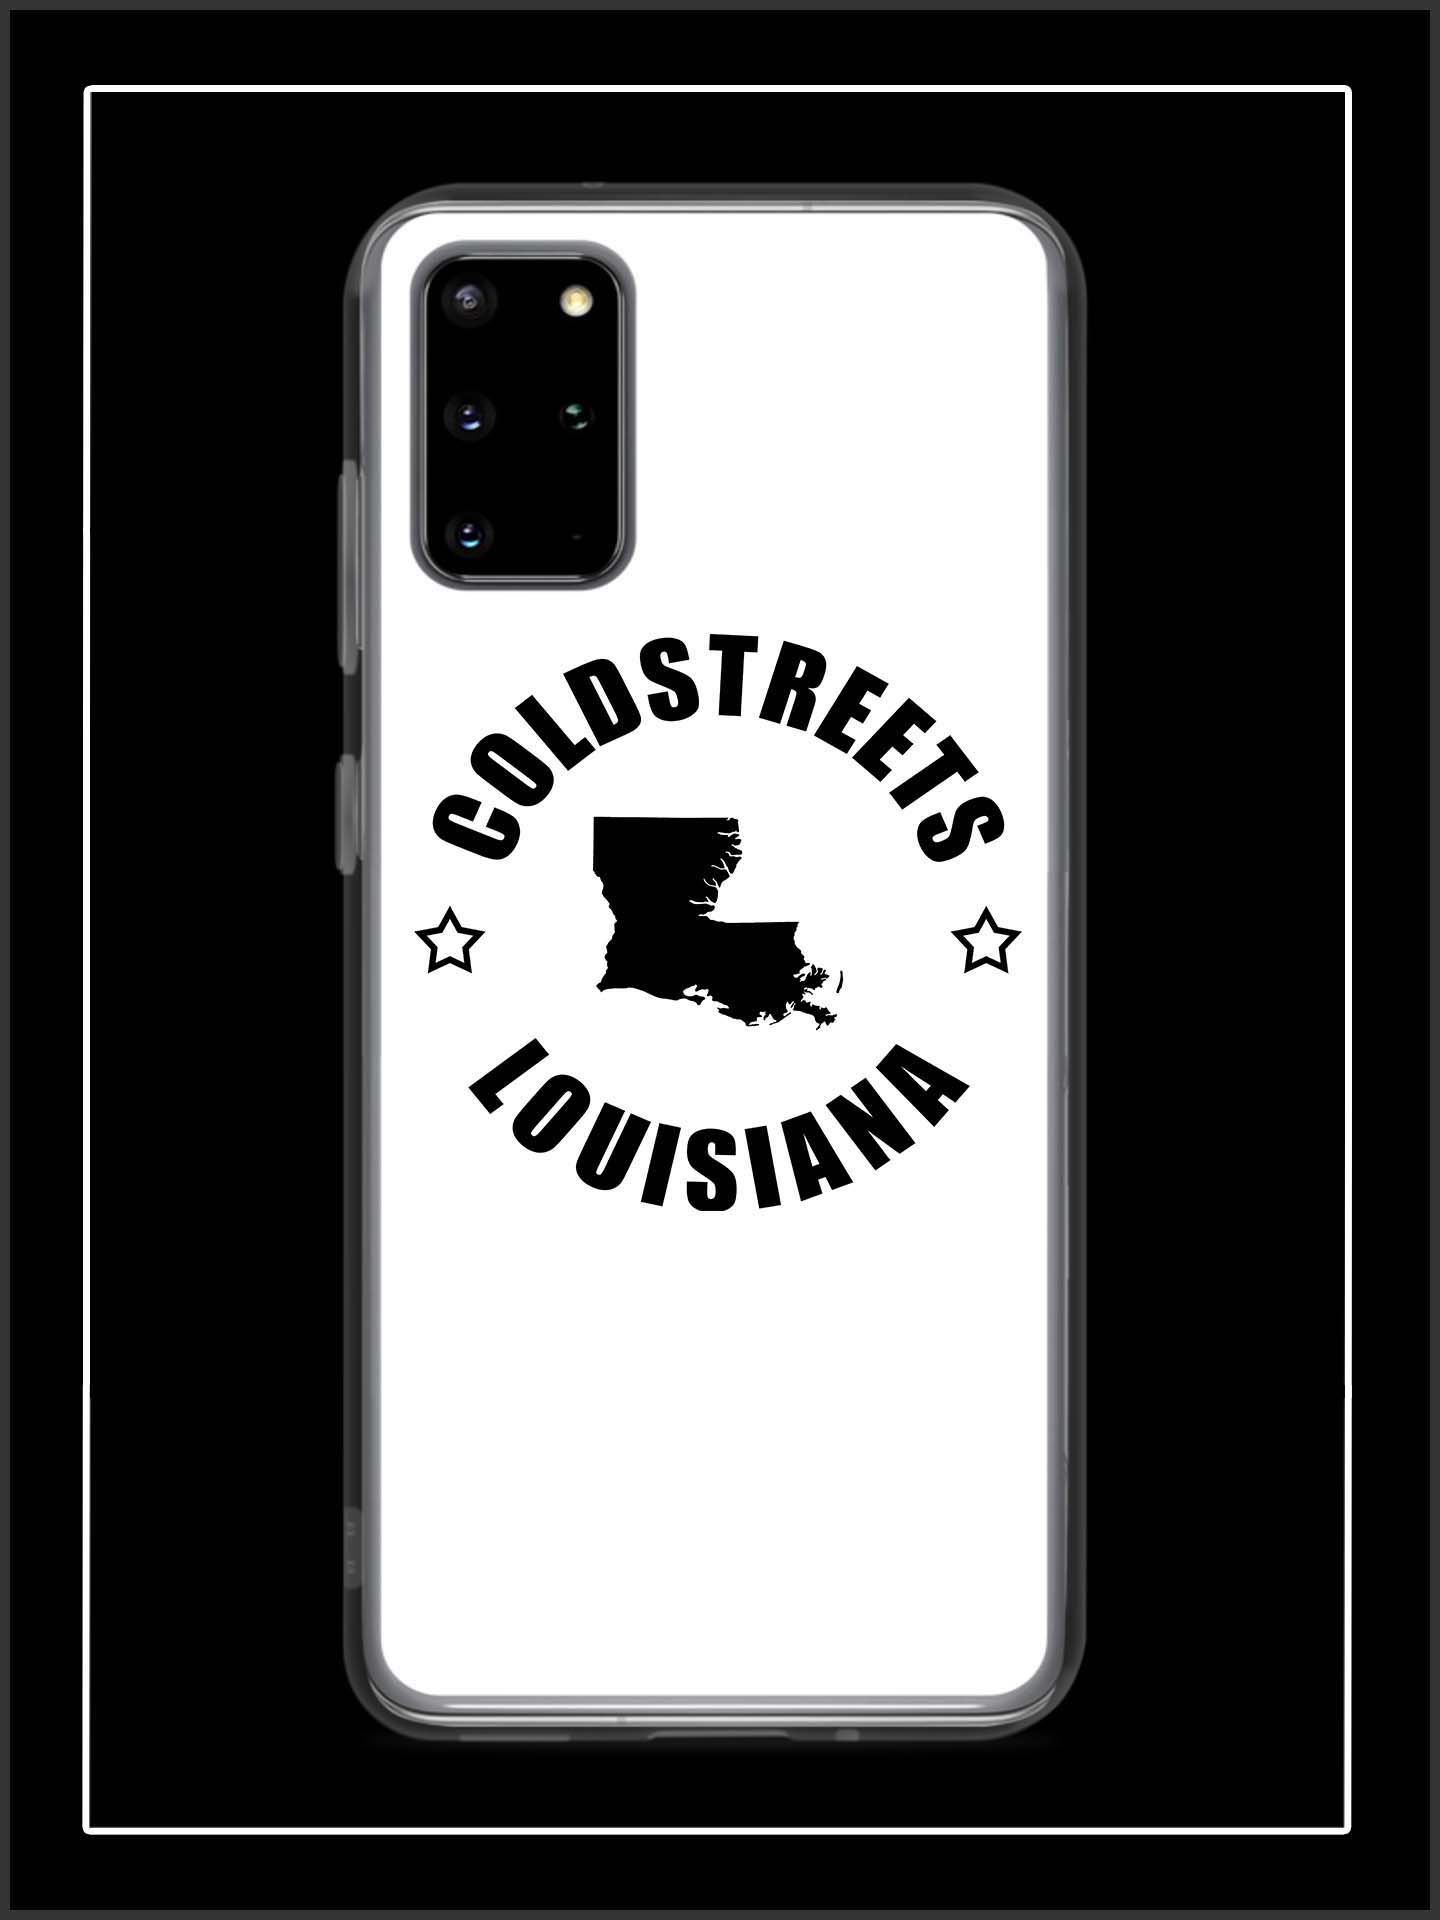 Cold Streets Louisiana Samsung Cases